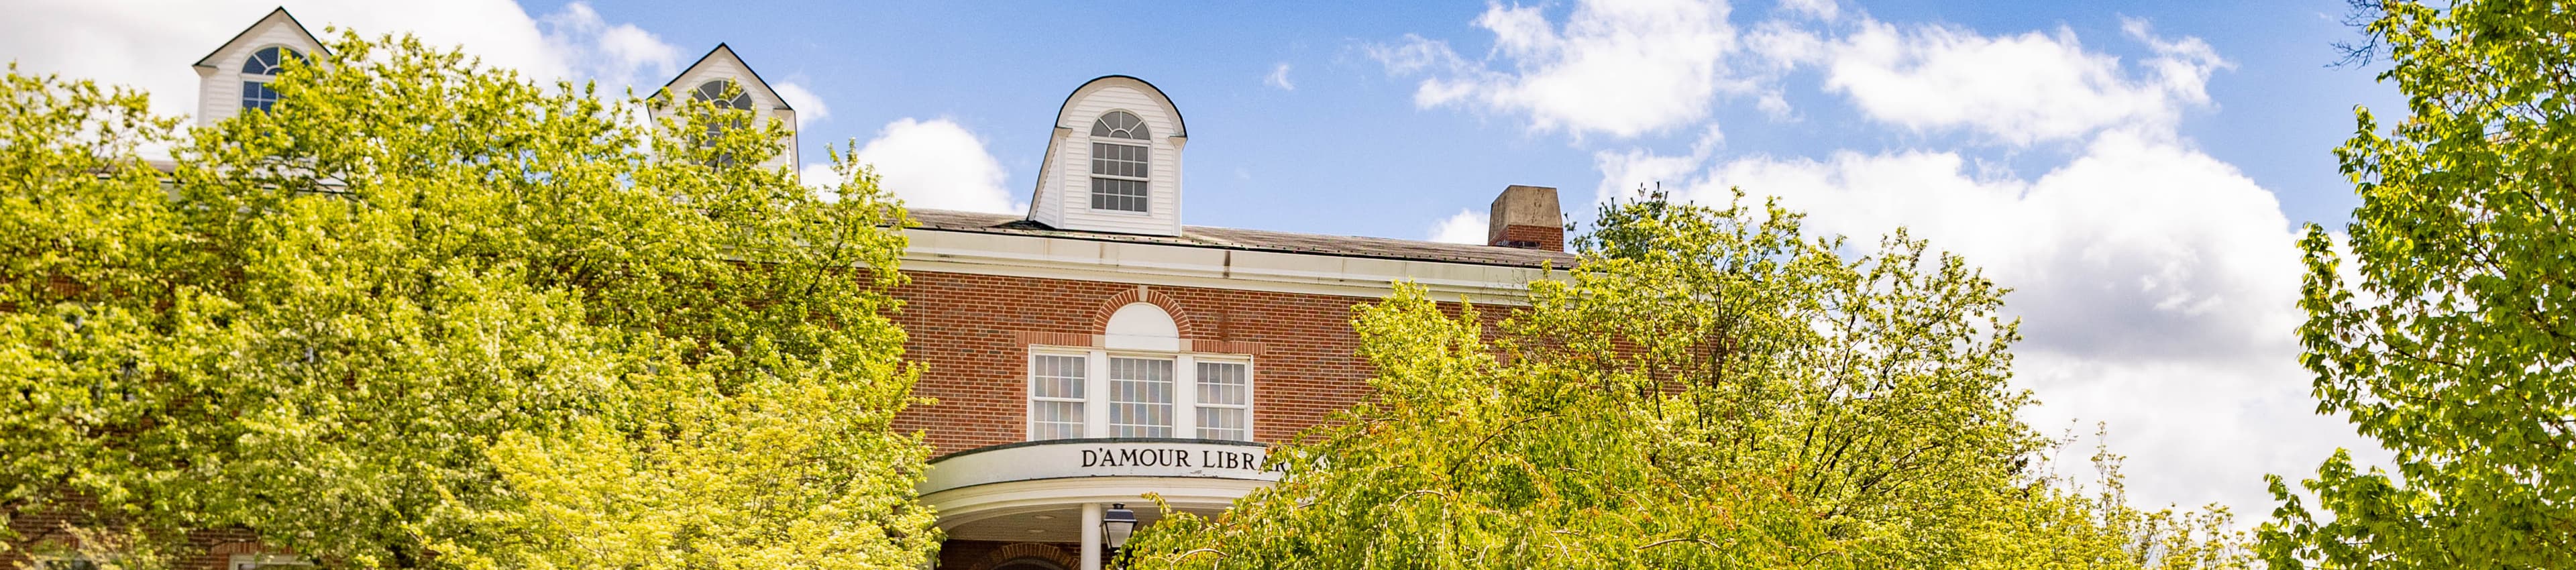 D'Amour library